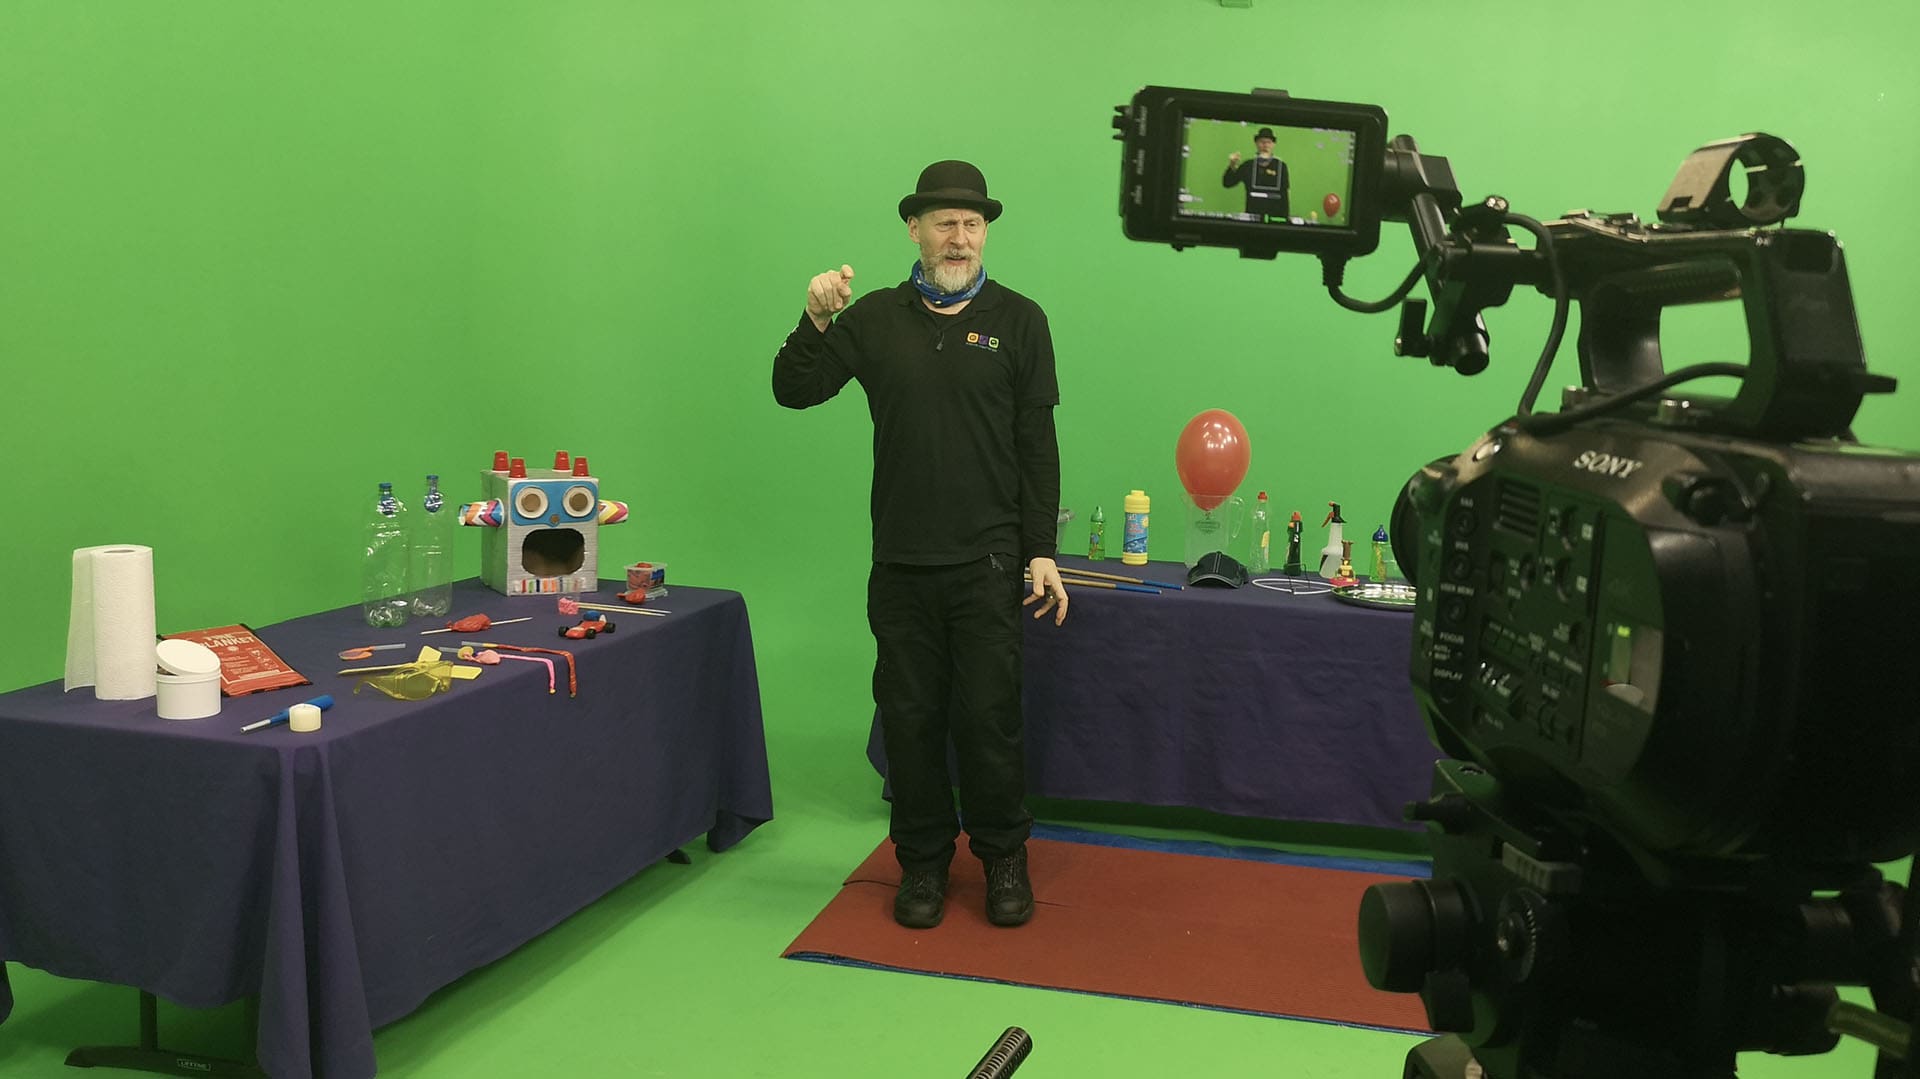 green screen e-learning video image